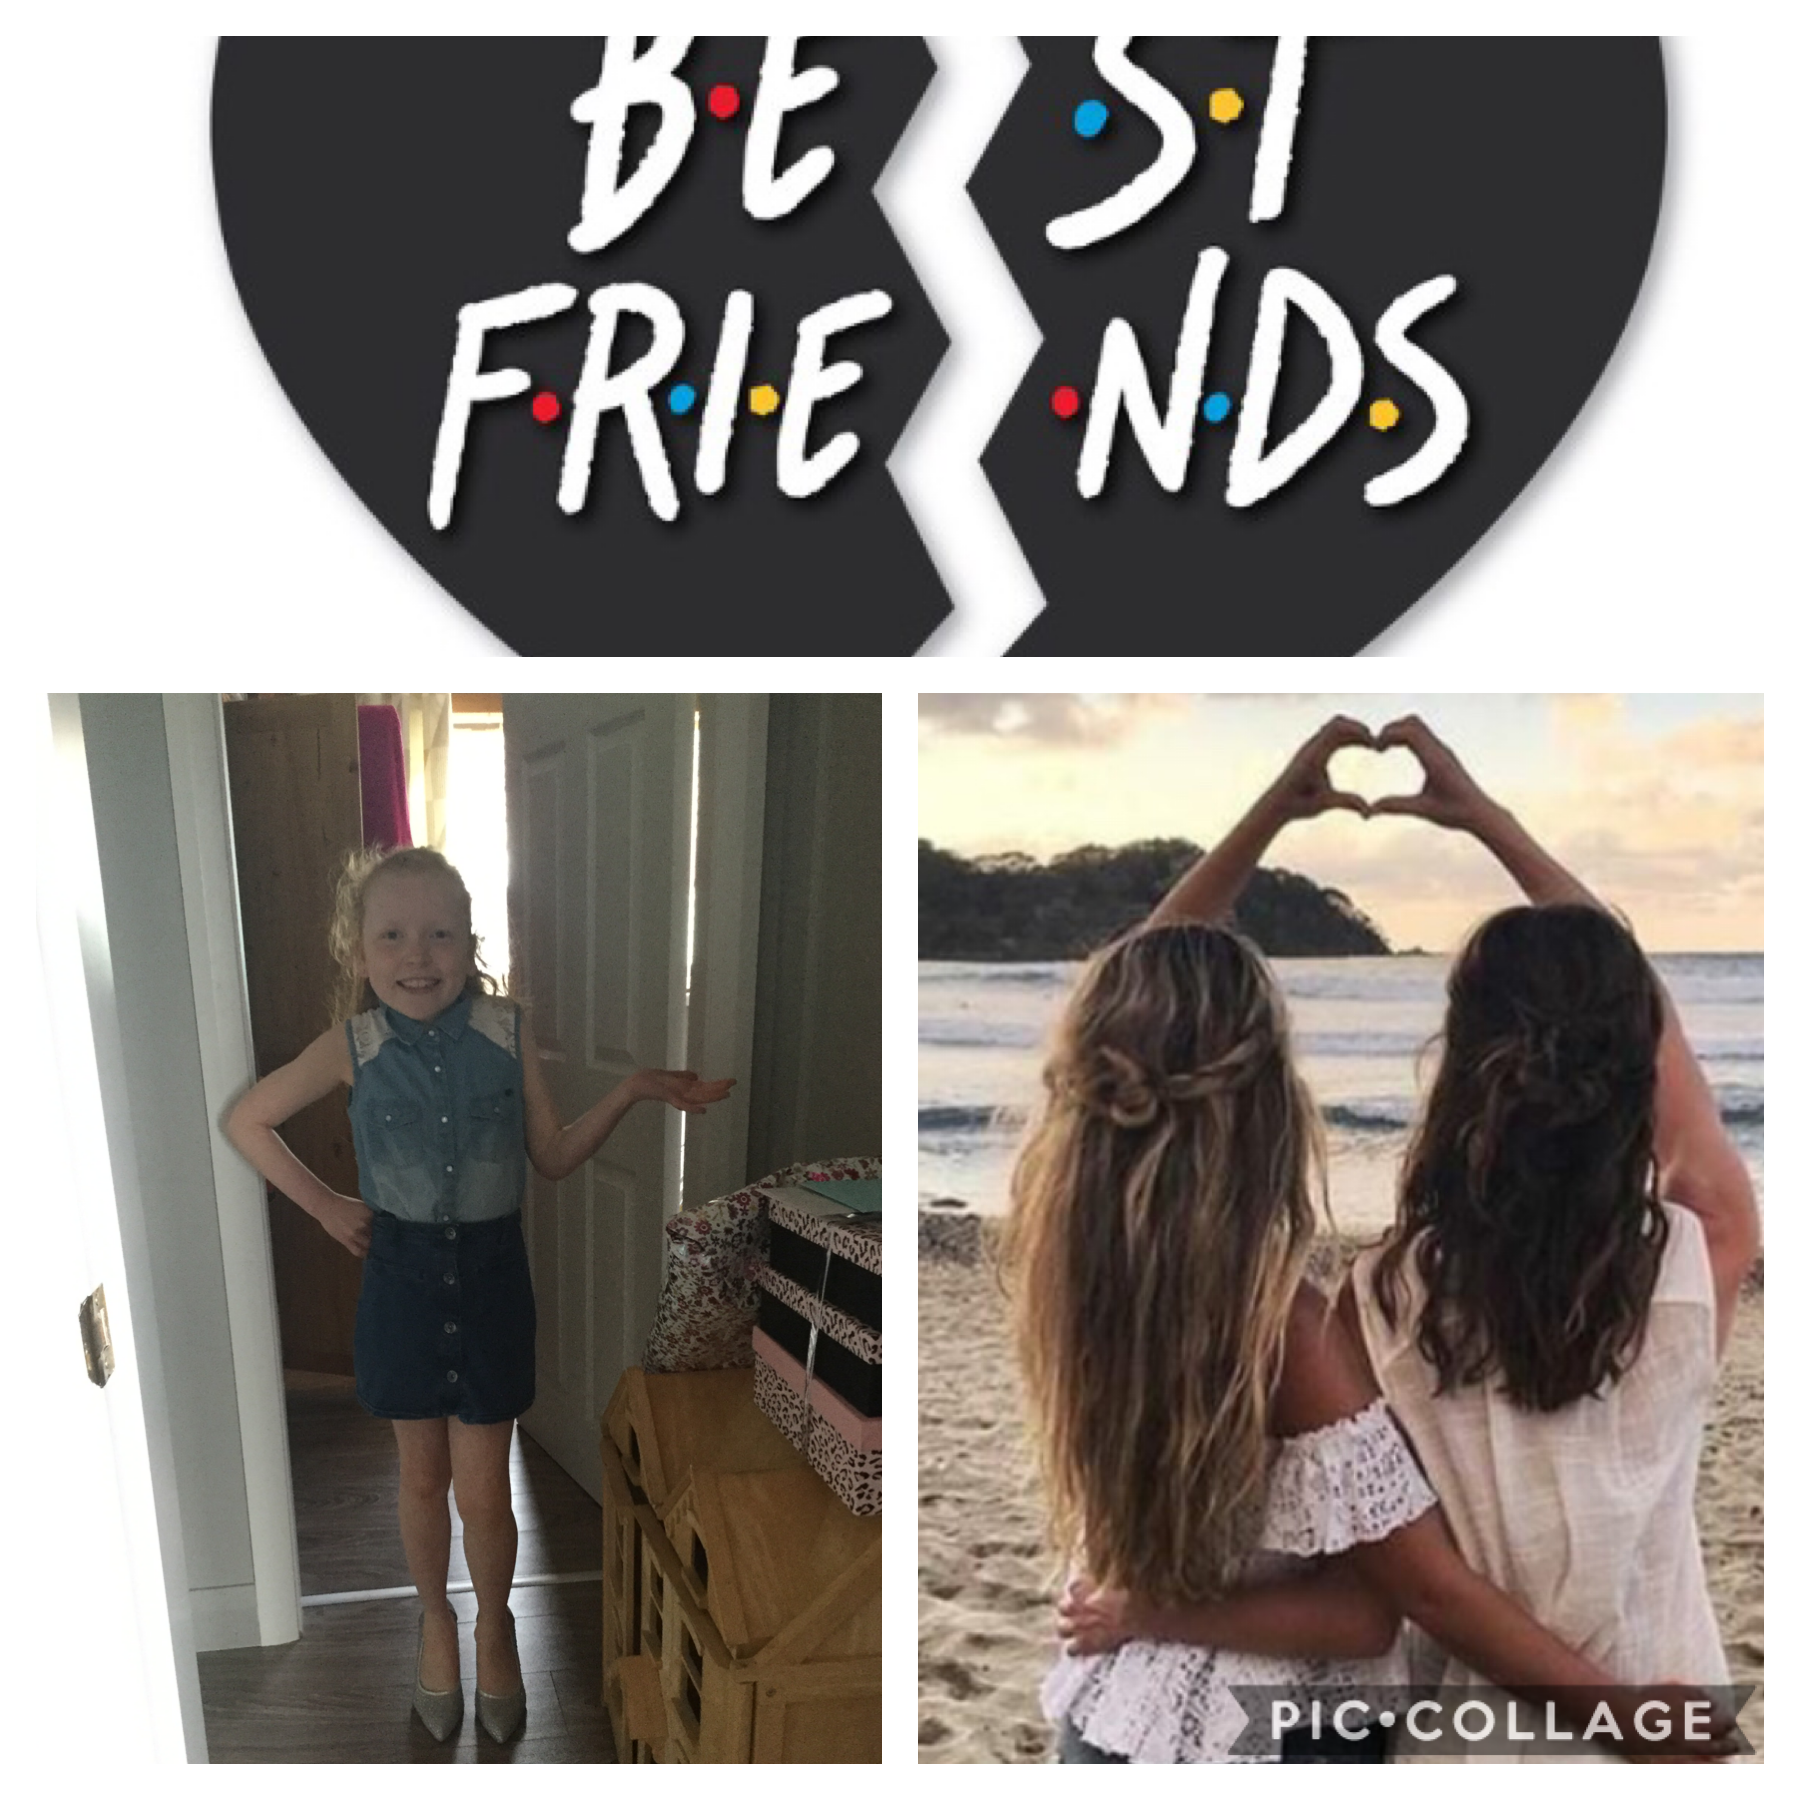 I love my BFF Eimear her users Eimear1 go check it out 